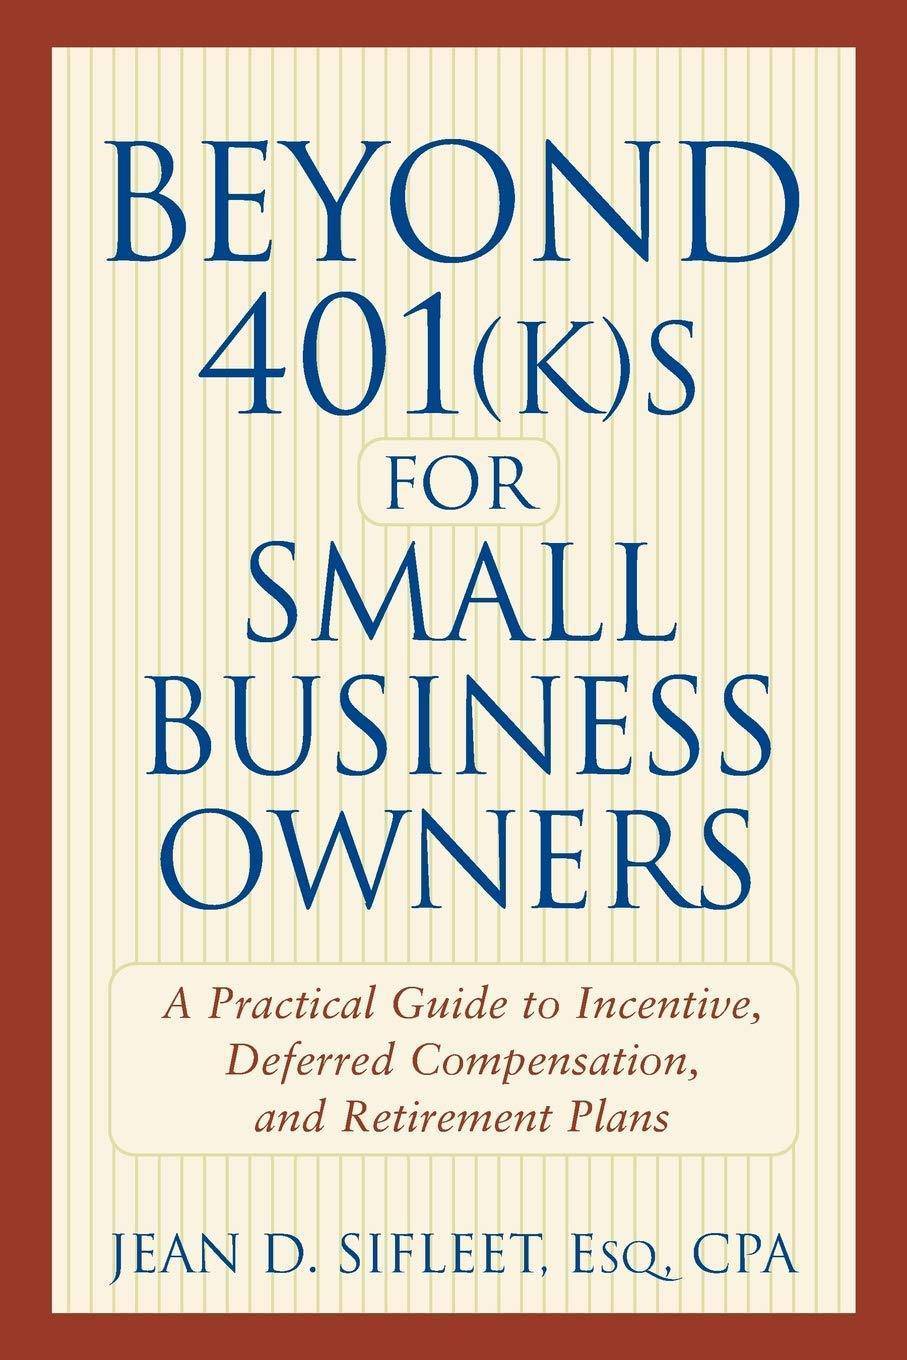 Beyond 401(k)s for Small Business Owners - SureShot Books Publishing LLC